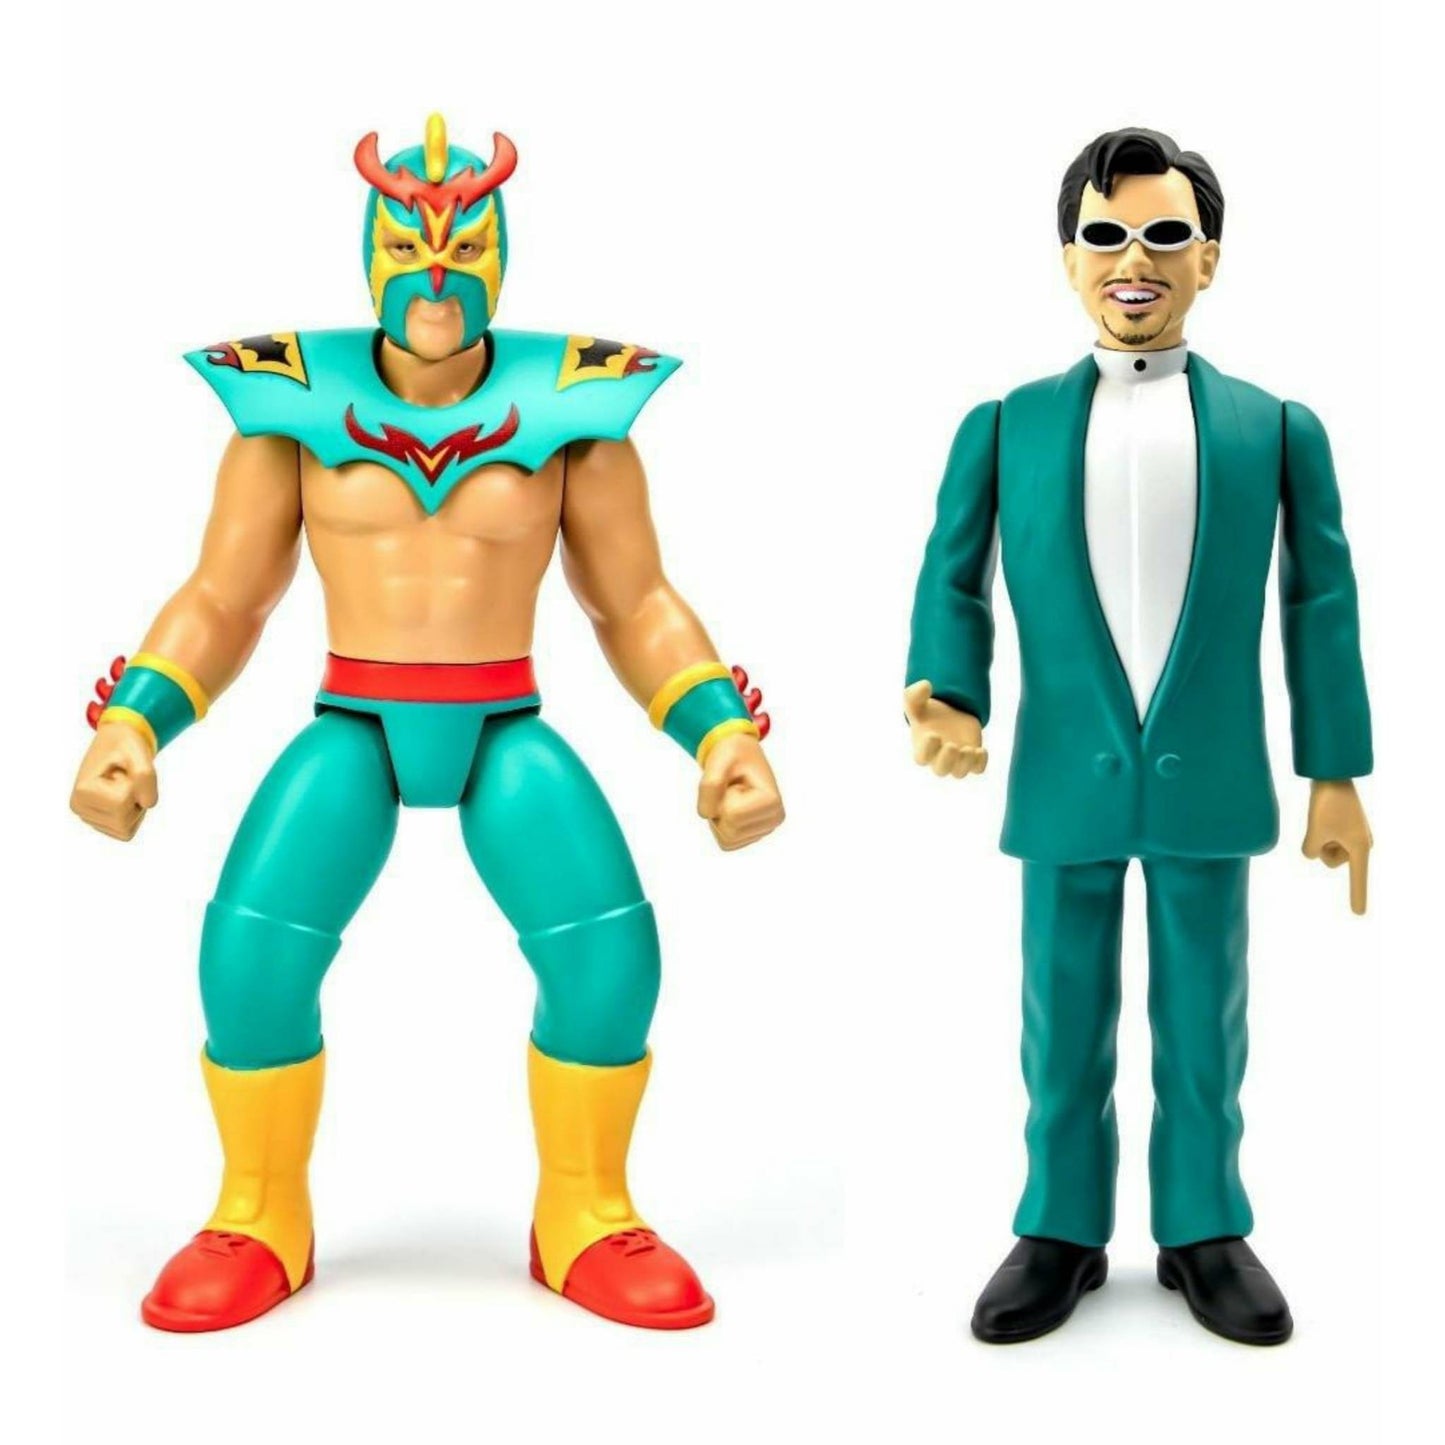 2024 FC Toys Bone Crushing Wrestlers Series 1 Ultimo Dragon [With Teal Gear] & Sonny Onoo [With Teal Suit]